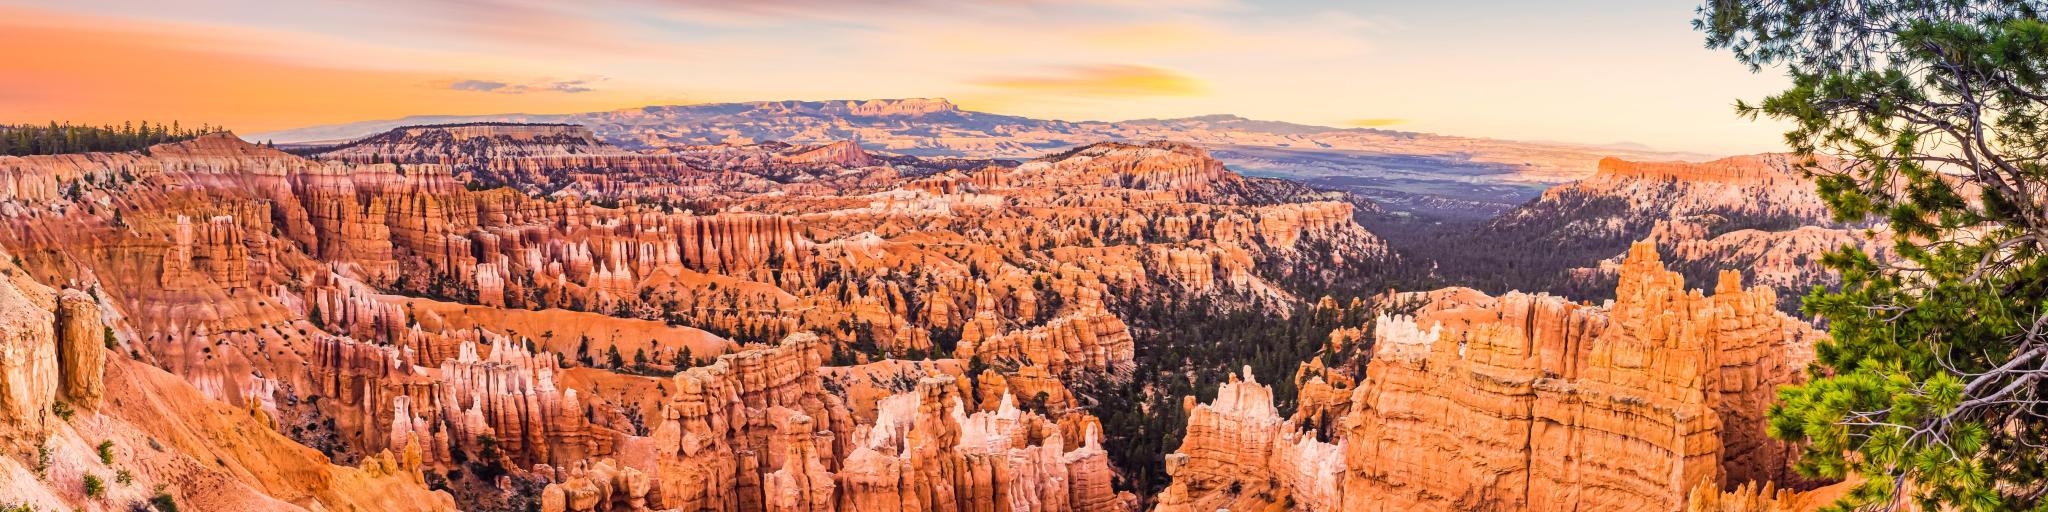 Panoramic view of Bryce Canyon National Park at sunset